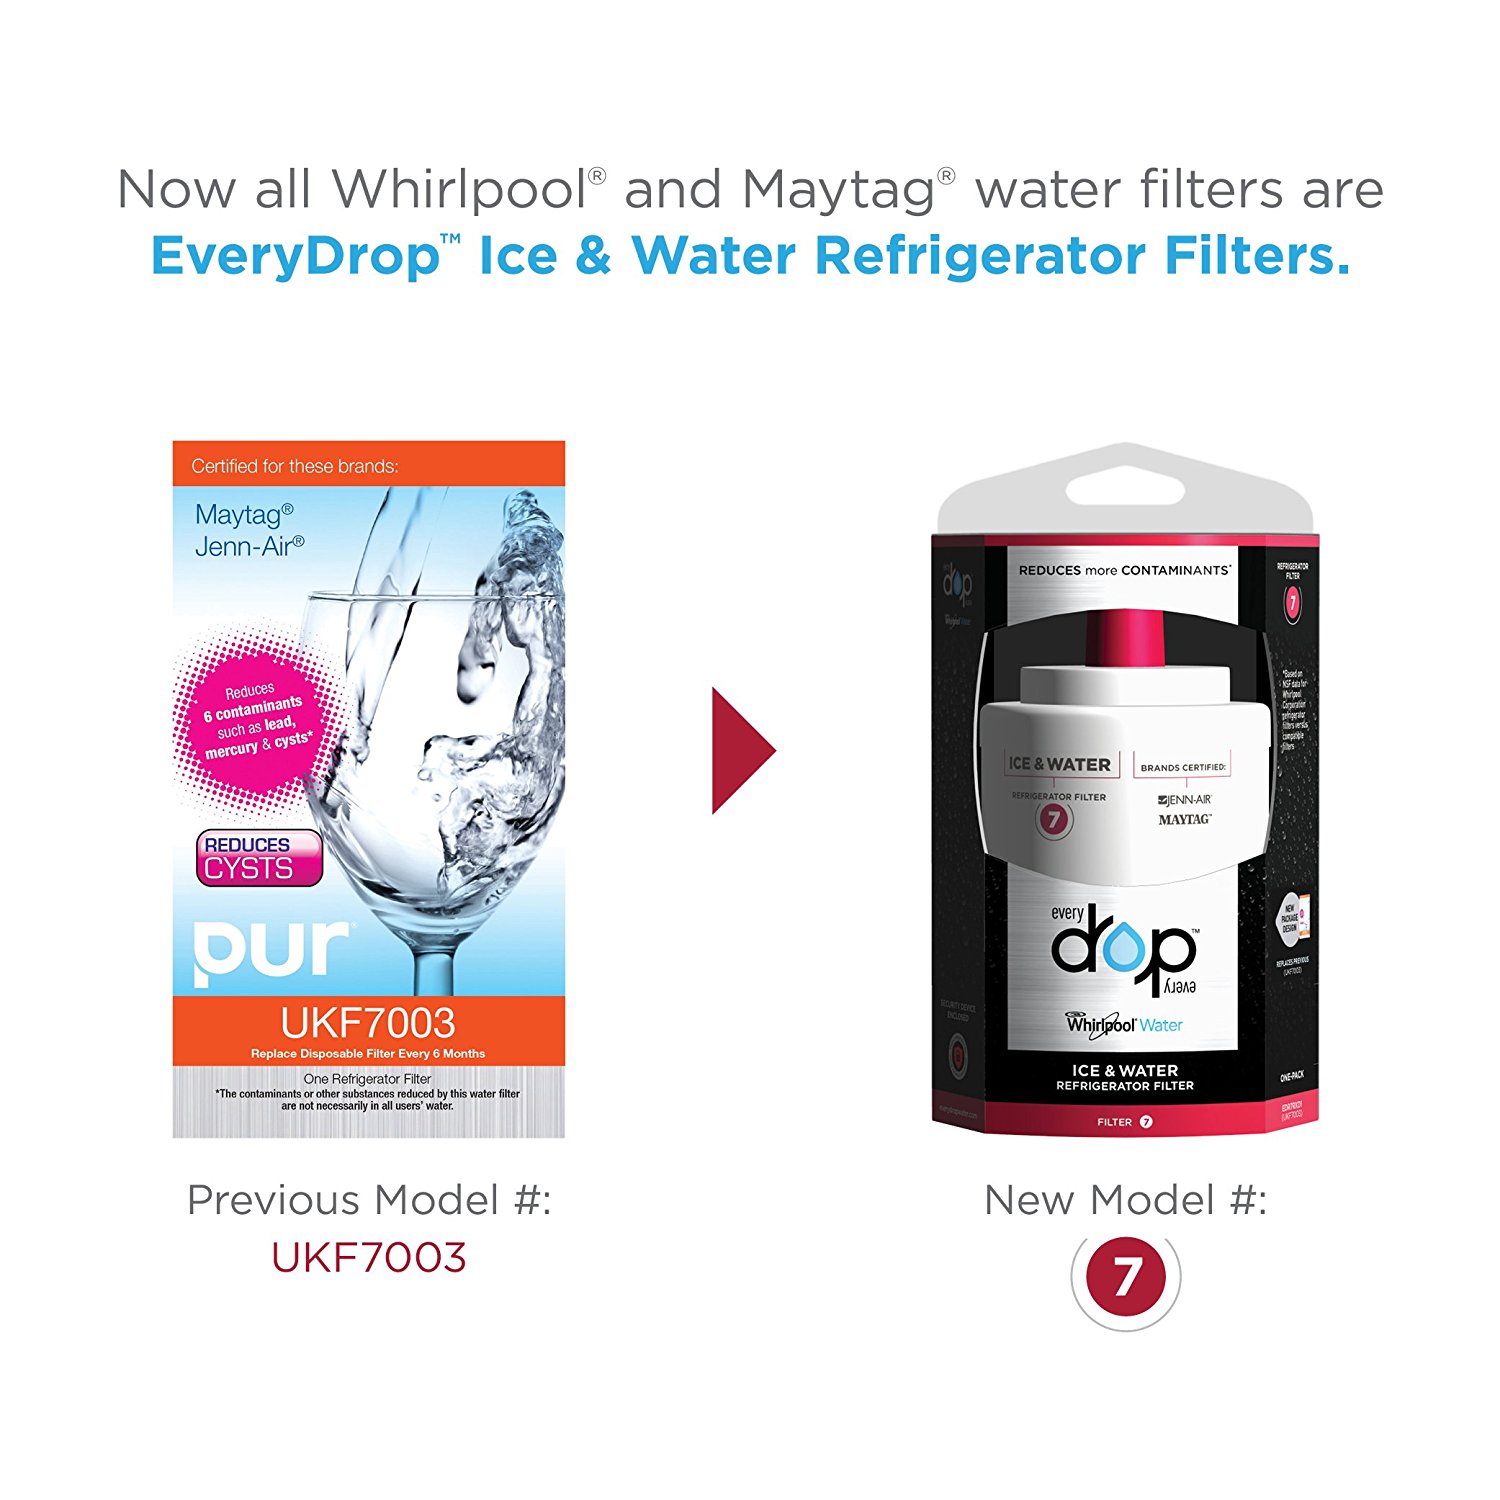 Amazon.com: EveryDrop by Whirlpool Refrigerator Water Filter 7 (Pack ...